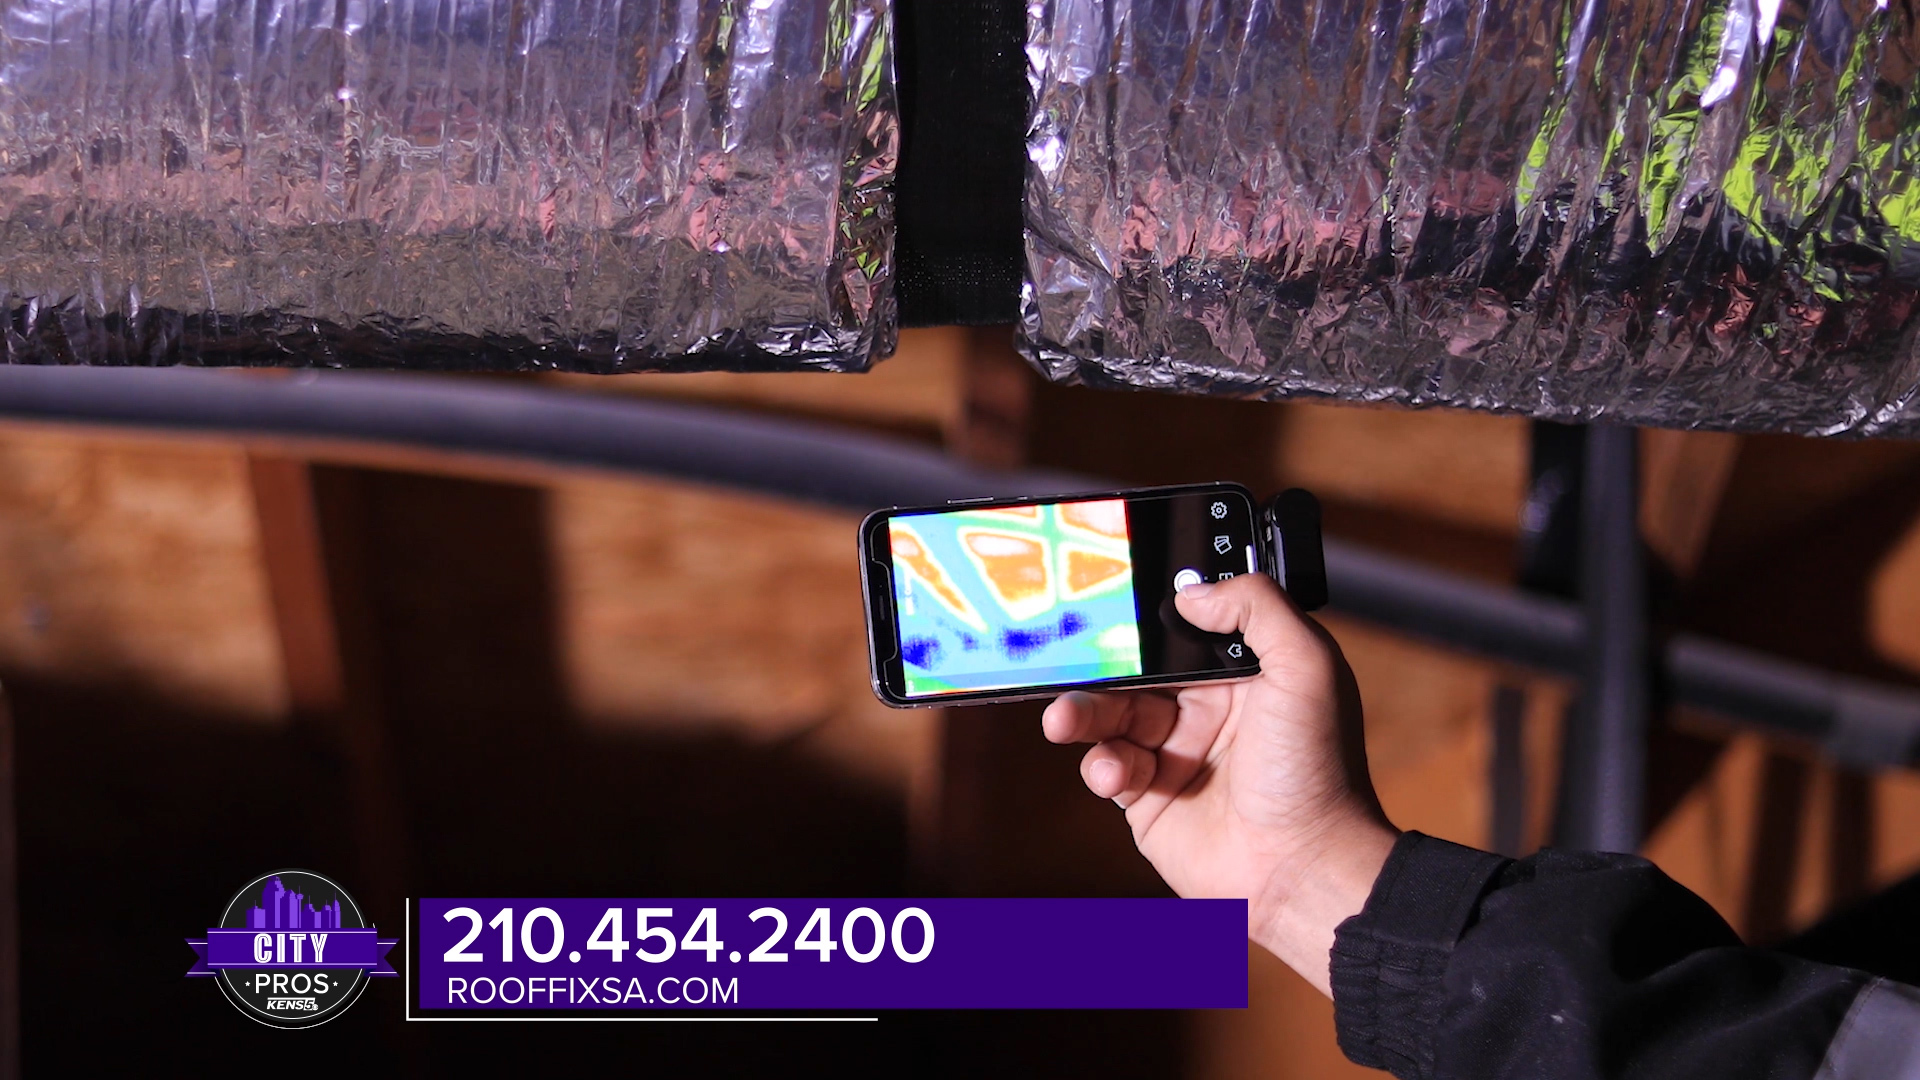 When you get a free inspection by Roof Fix, the pros use thermal imagery to uncover any damage from water entering through a home’s roof. This type of preventative maintenance can save their customers thousands of dollars.